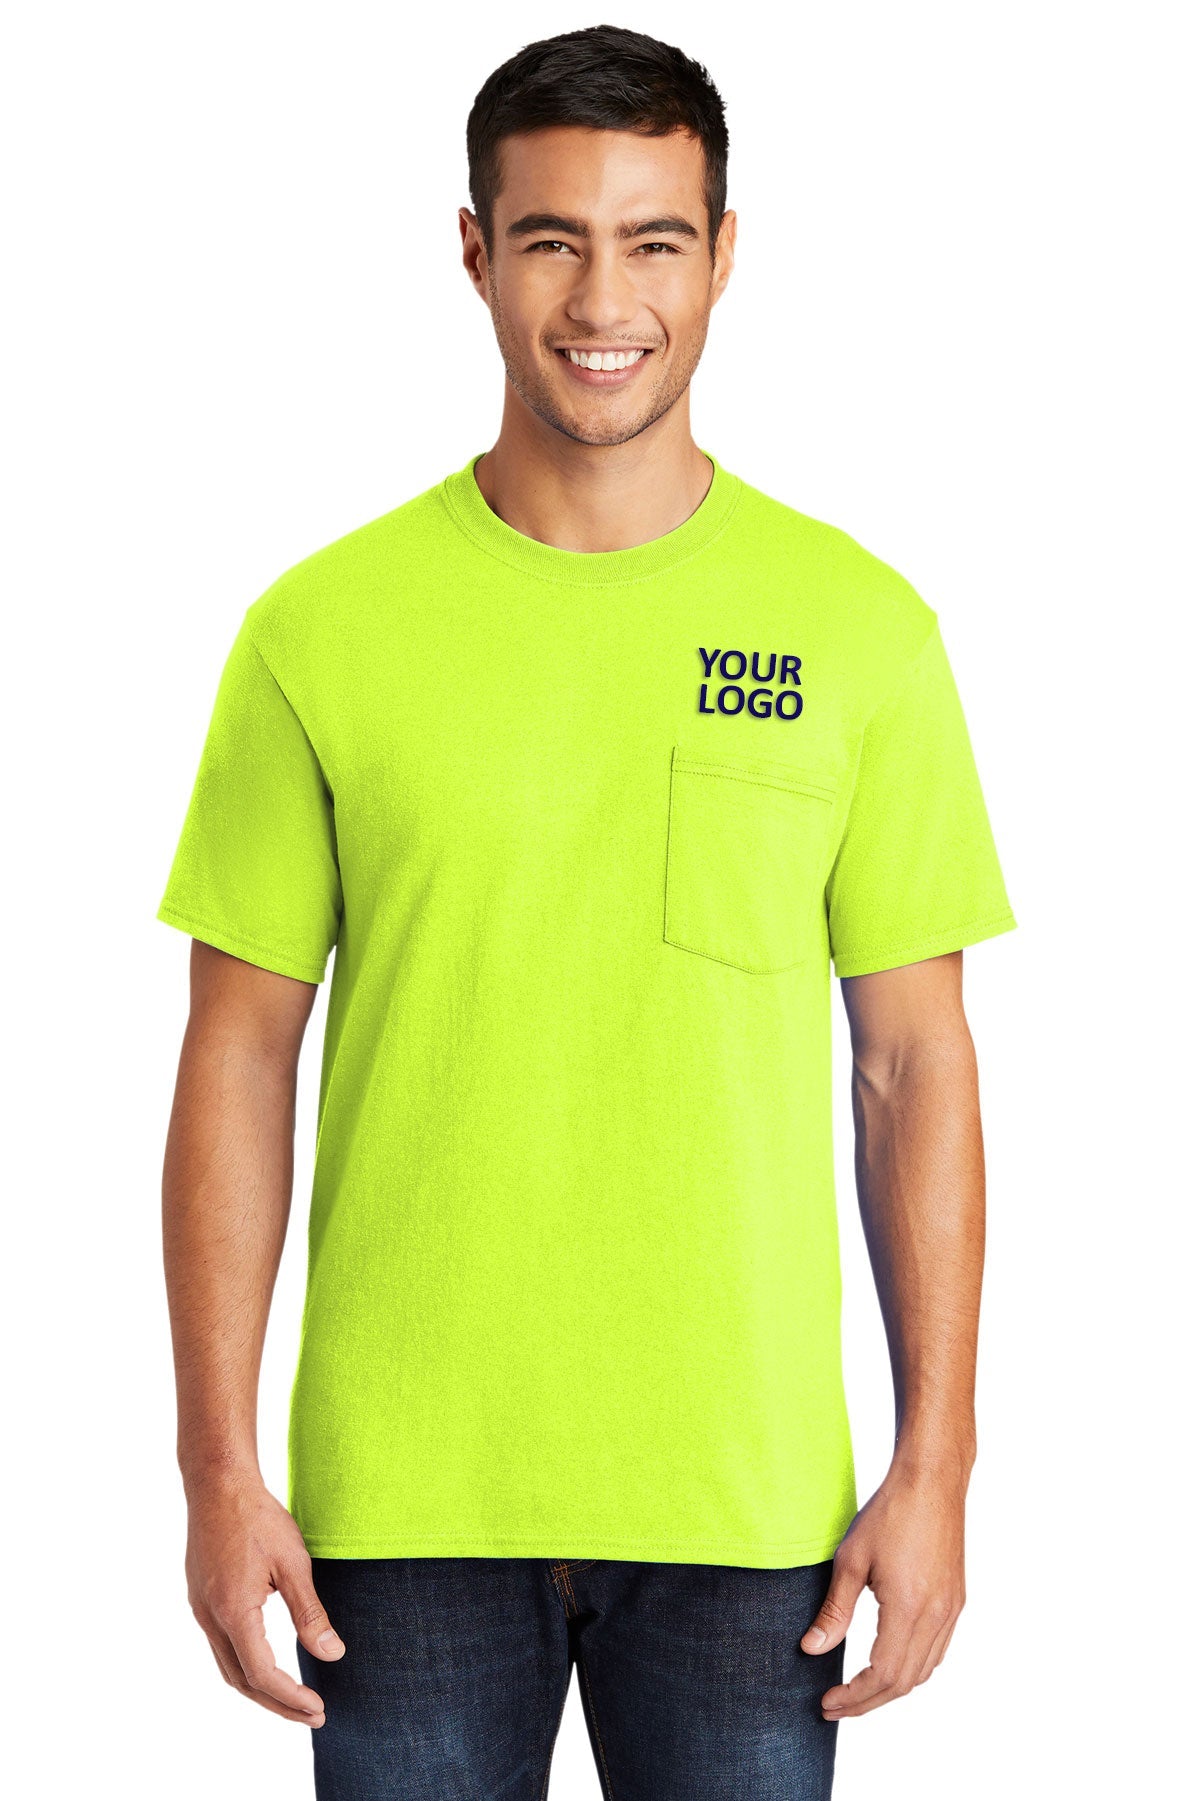 Port & Company Tall Core Blend Customized Pocket Tee's, Safety Green